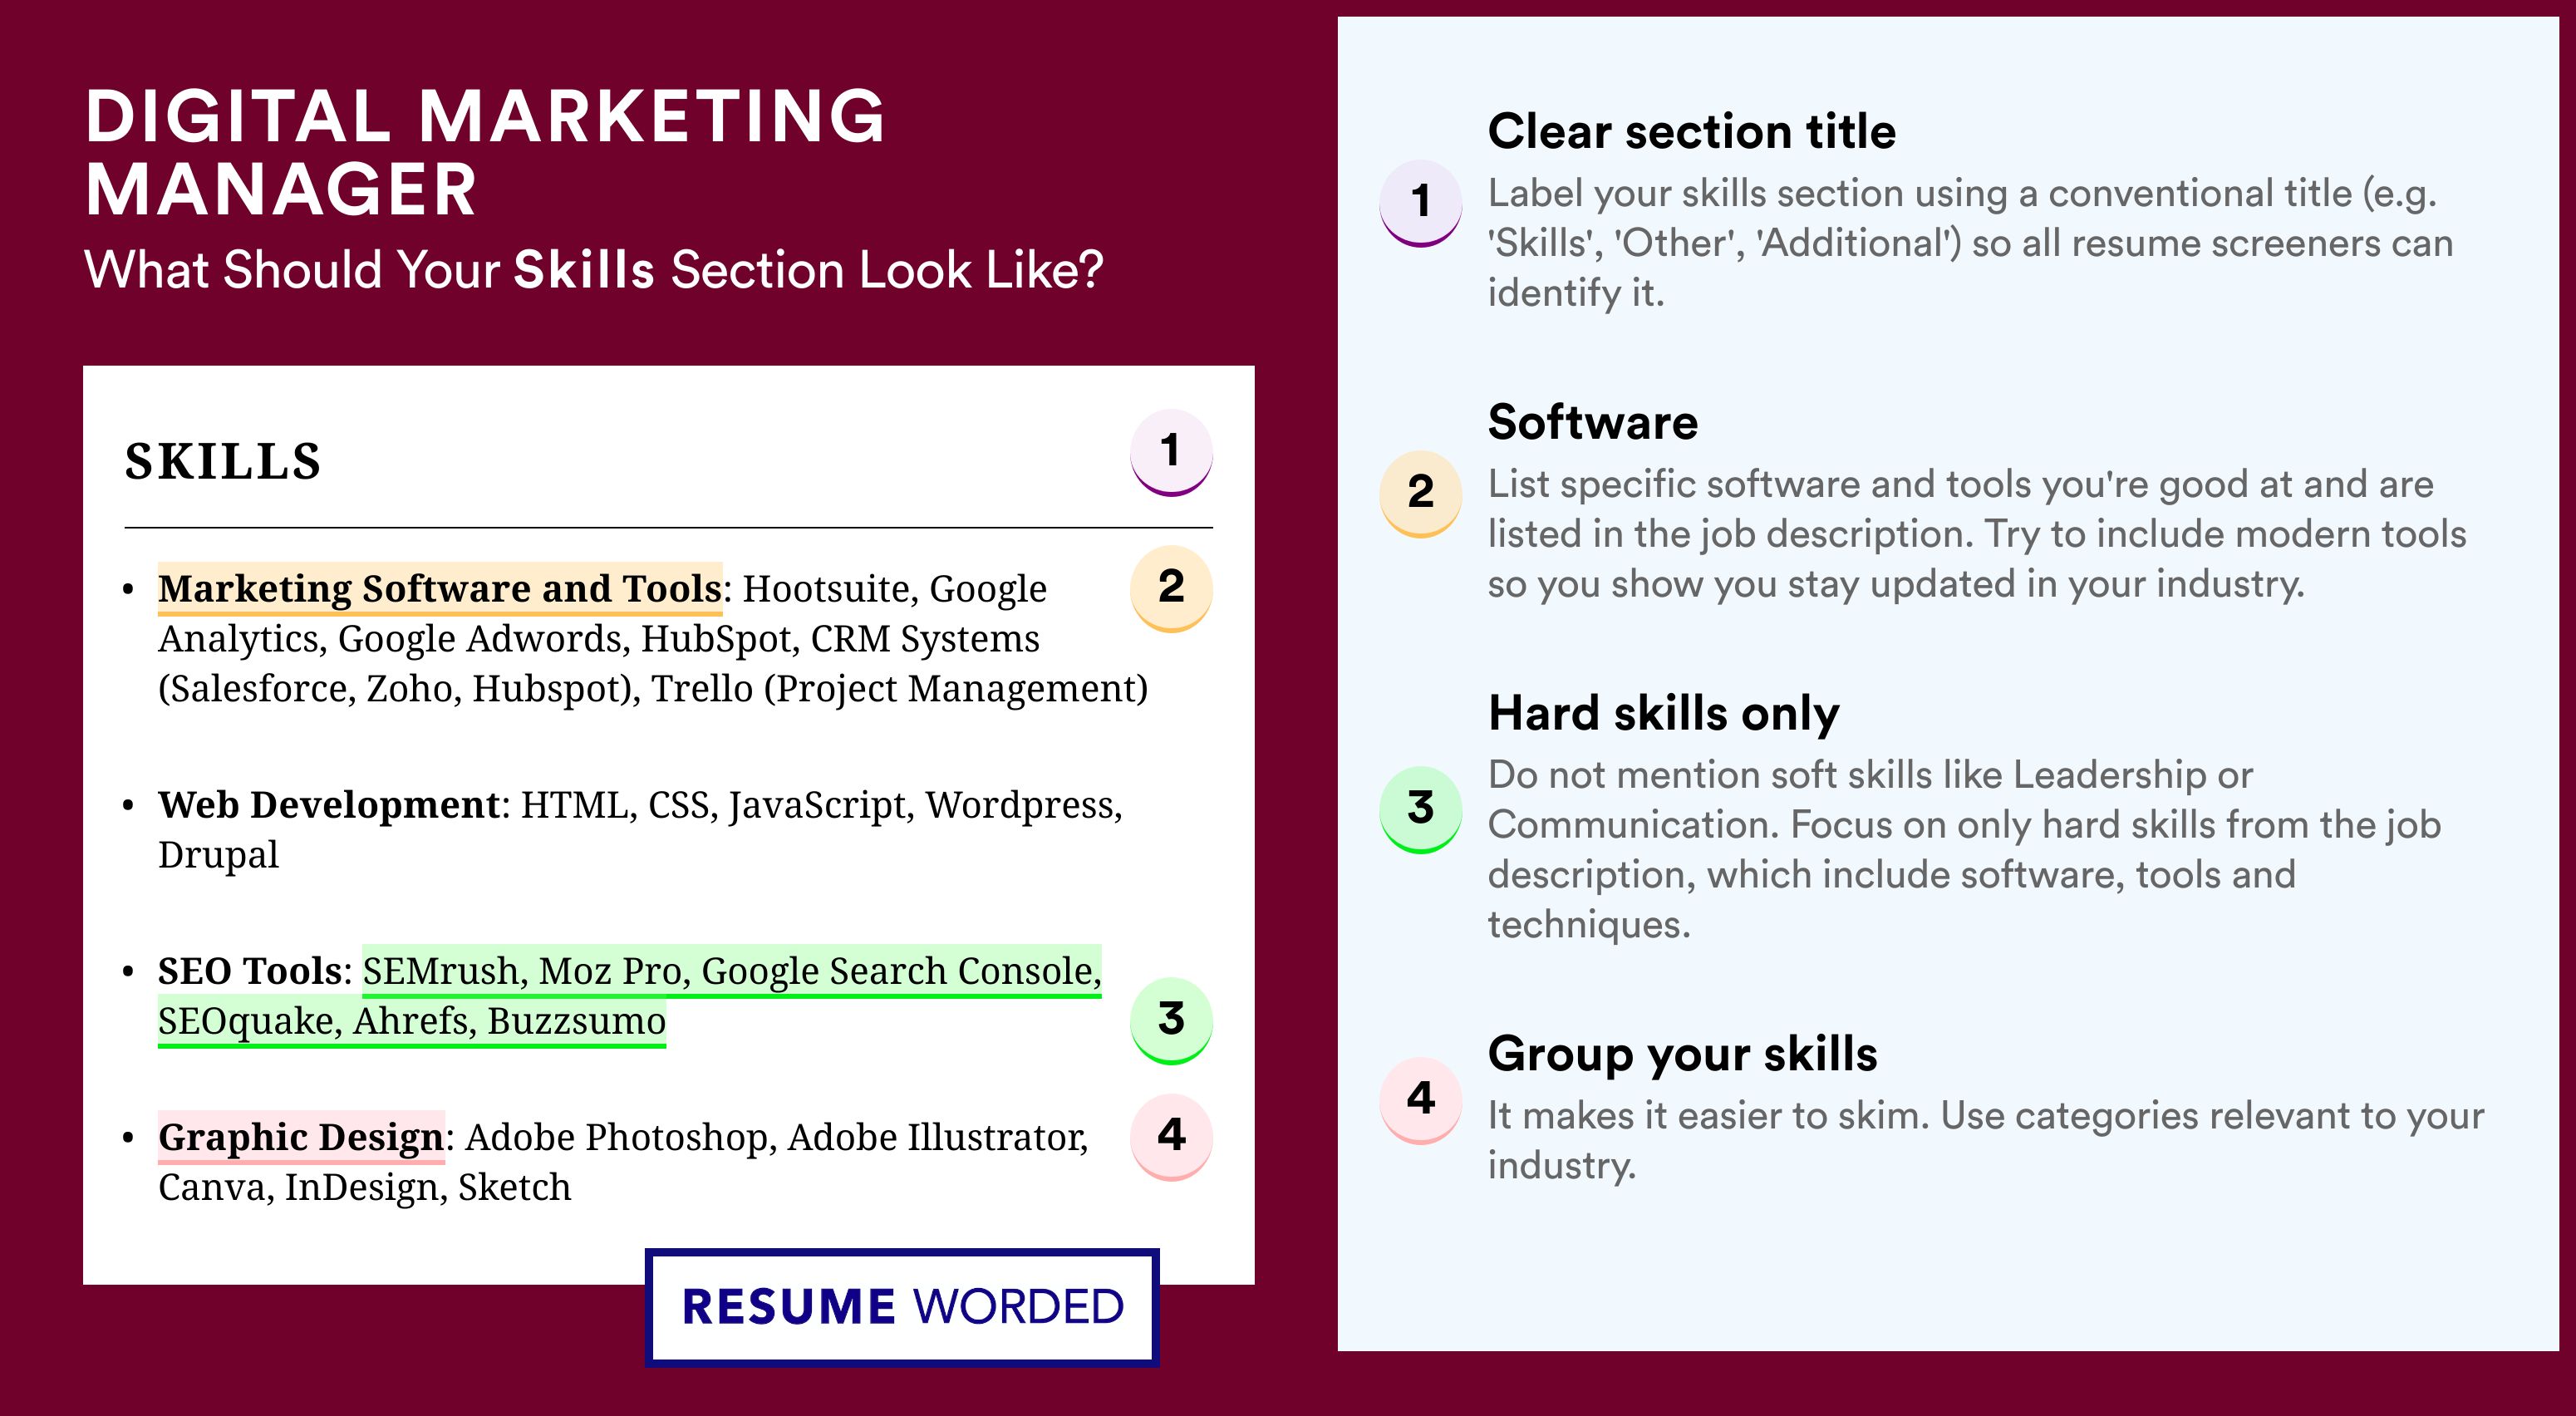 How To Write Your Skills Section - Digital Marketing Manager Roles